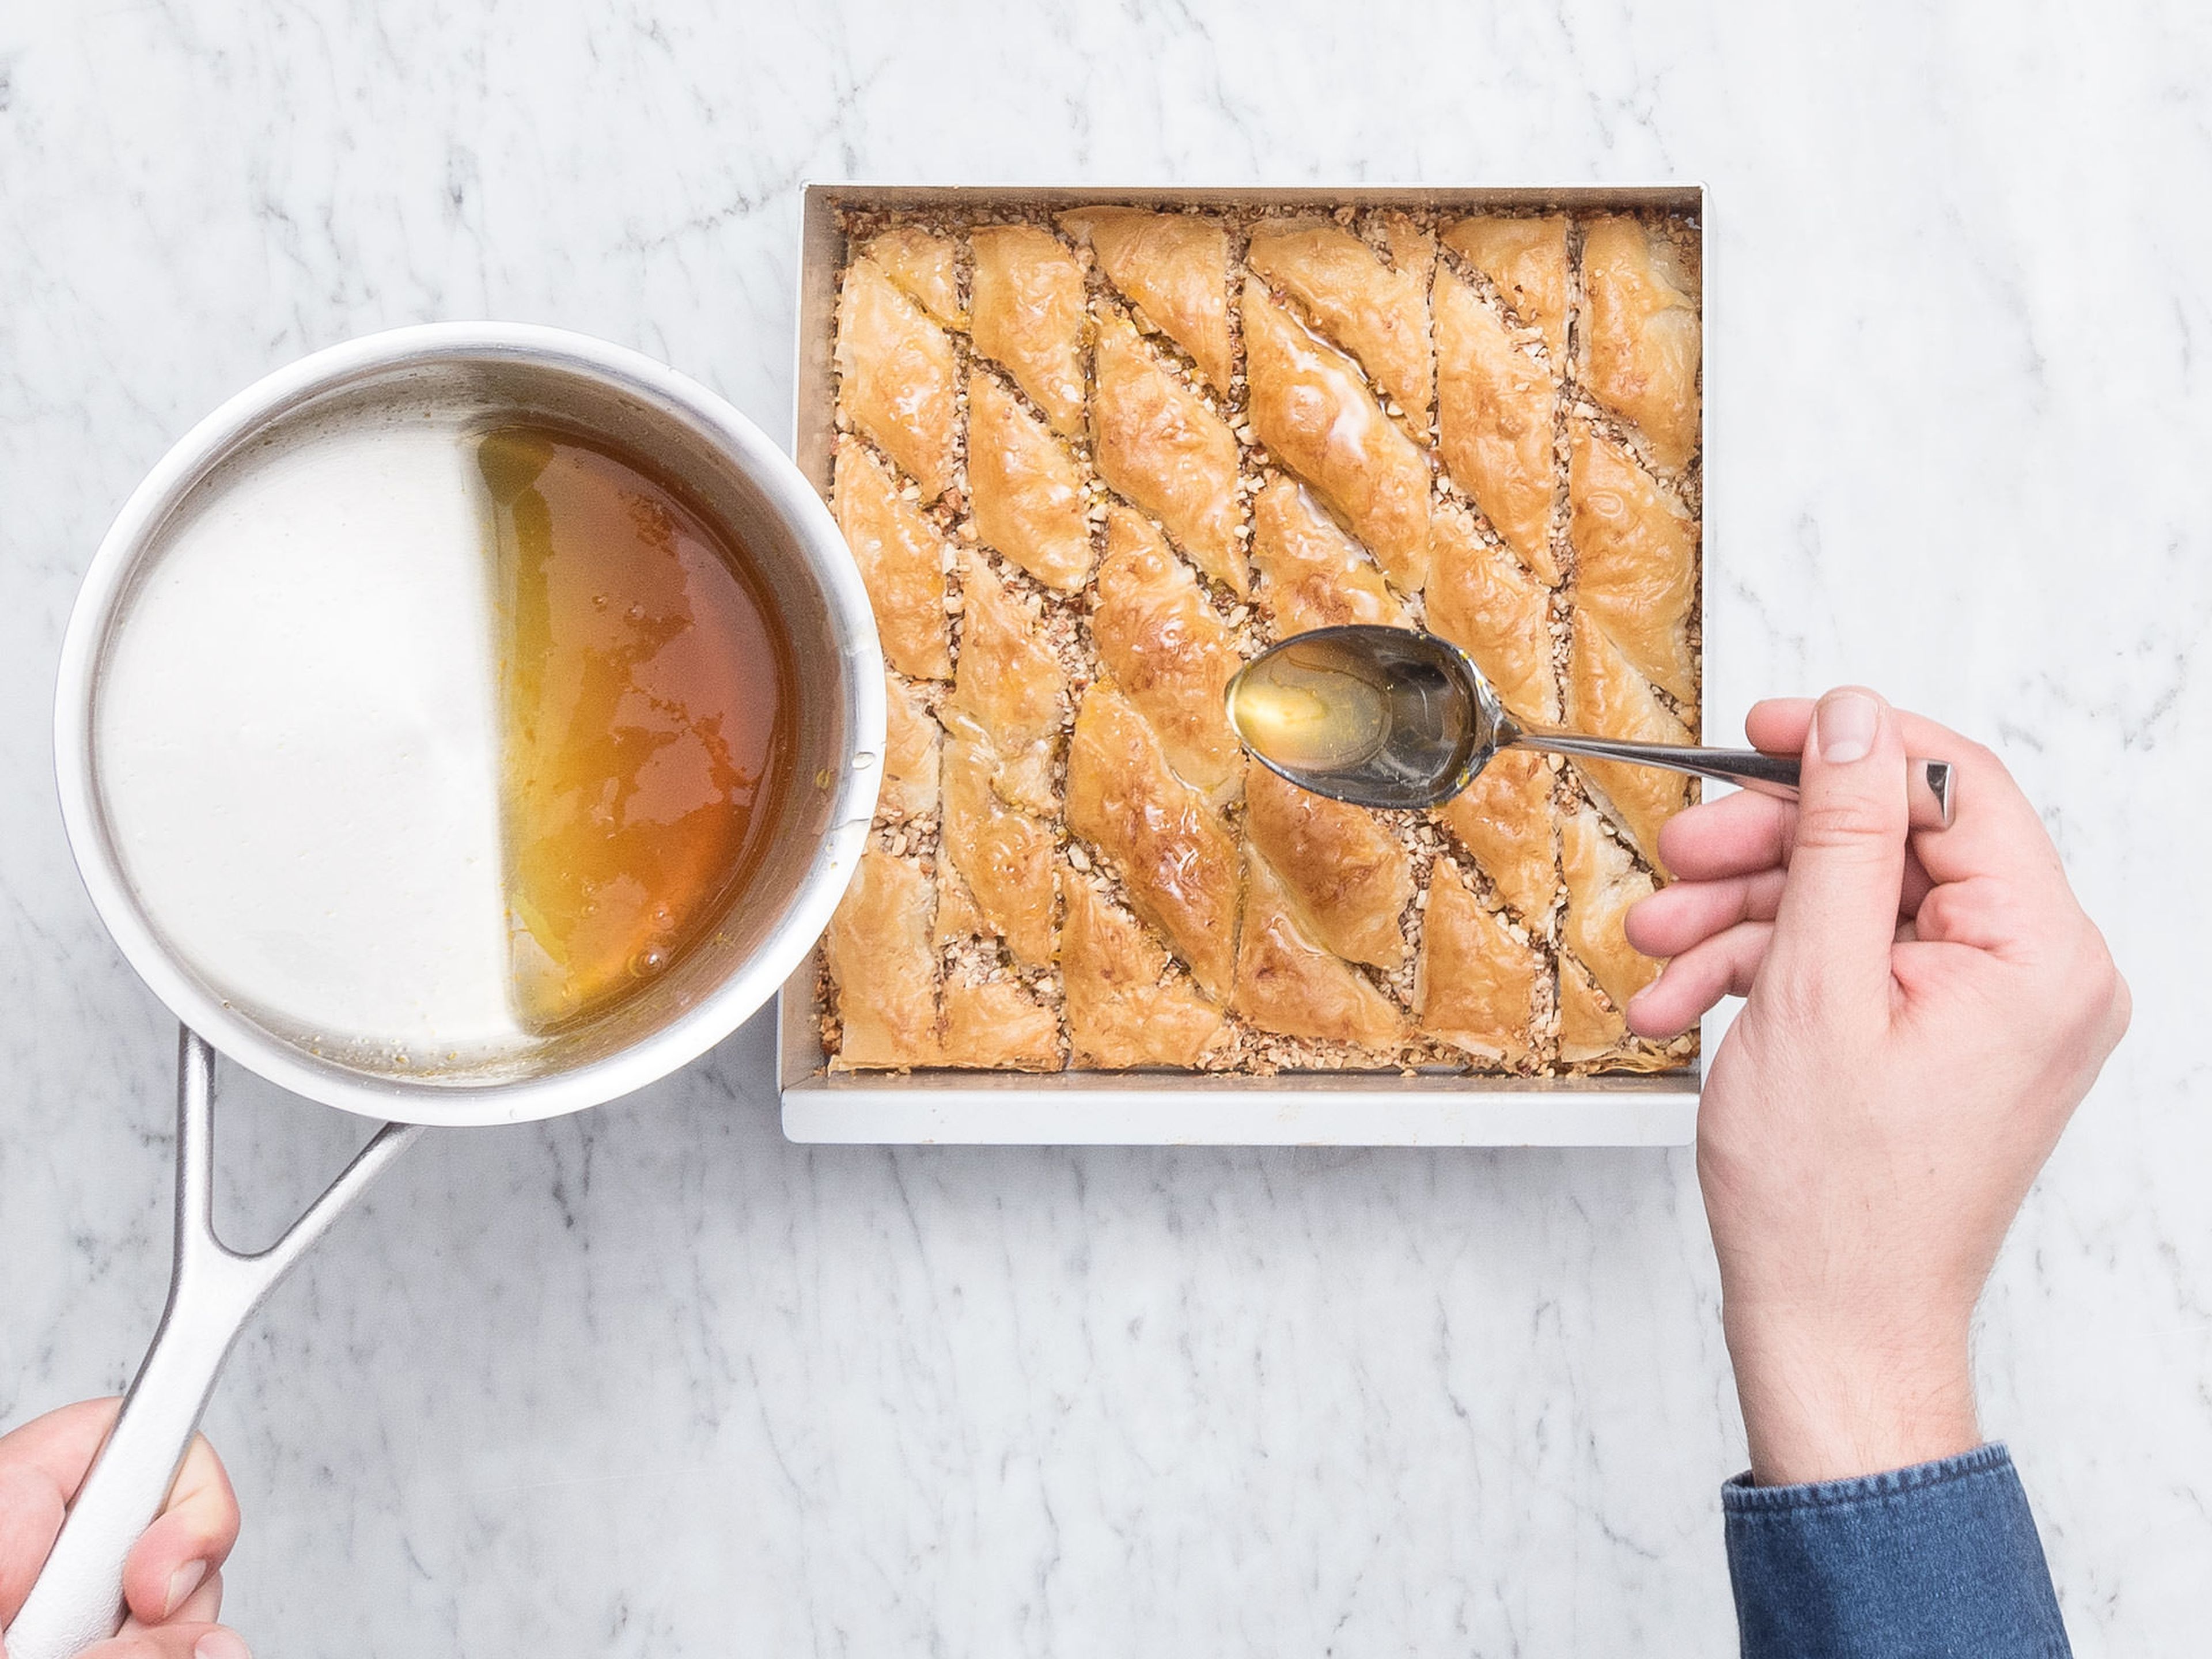 Remove from oven and slowly pour the syrup all over the baklava, allowing enough time for it to absorb. Let the baklava cool completely before removing from the tray with the help of an offset spatula. Enjoy!